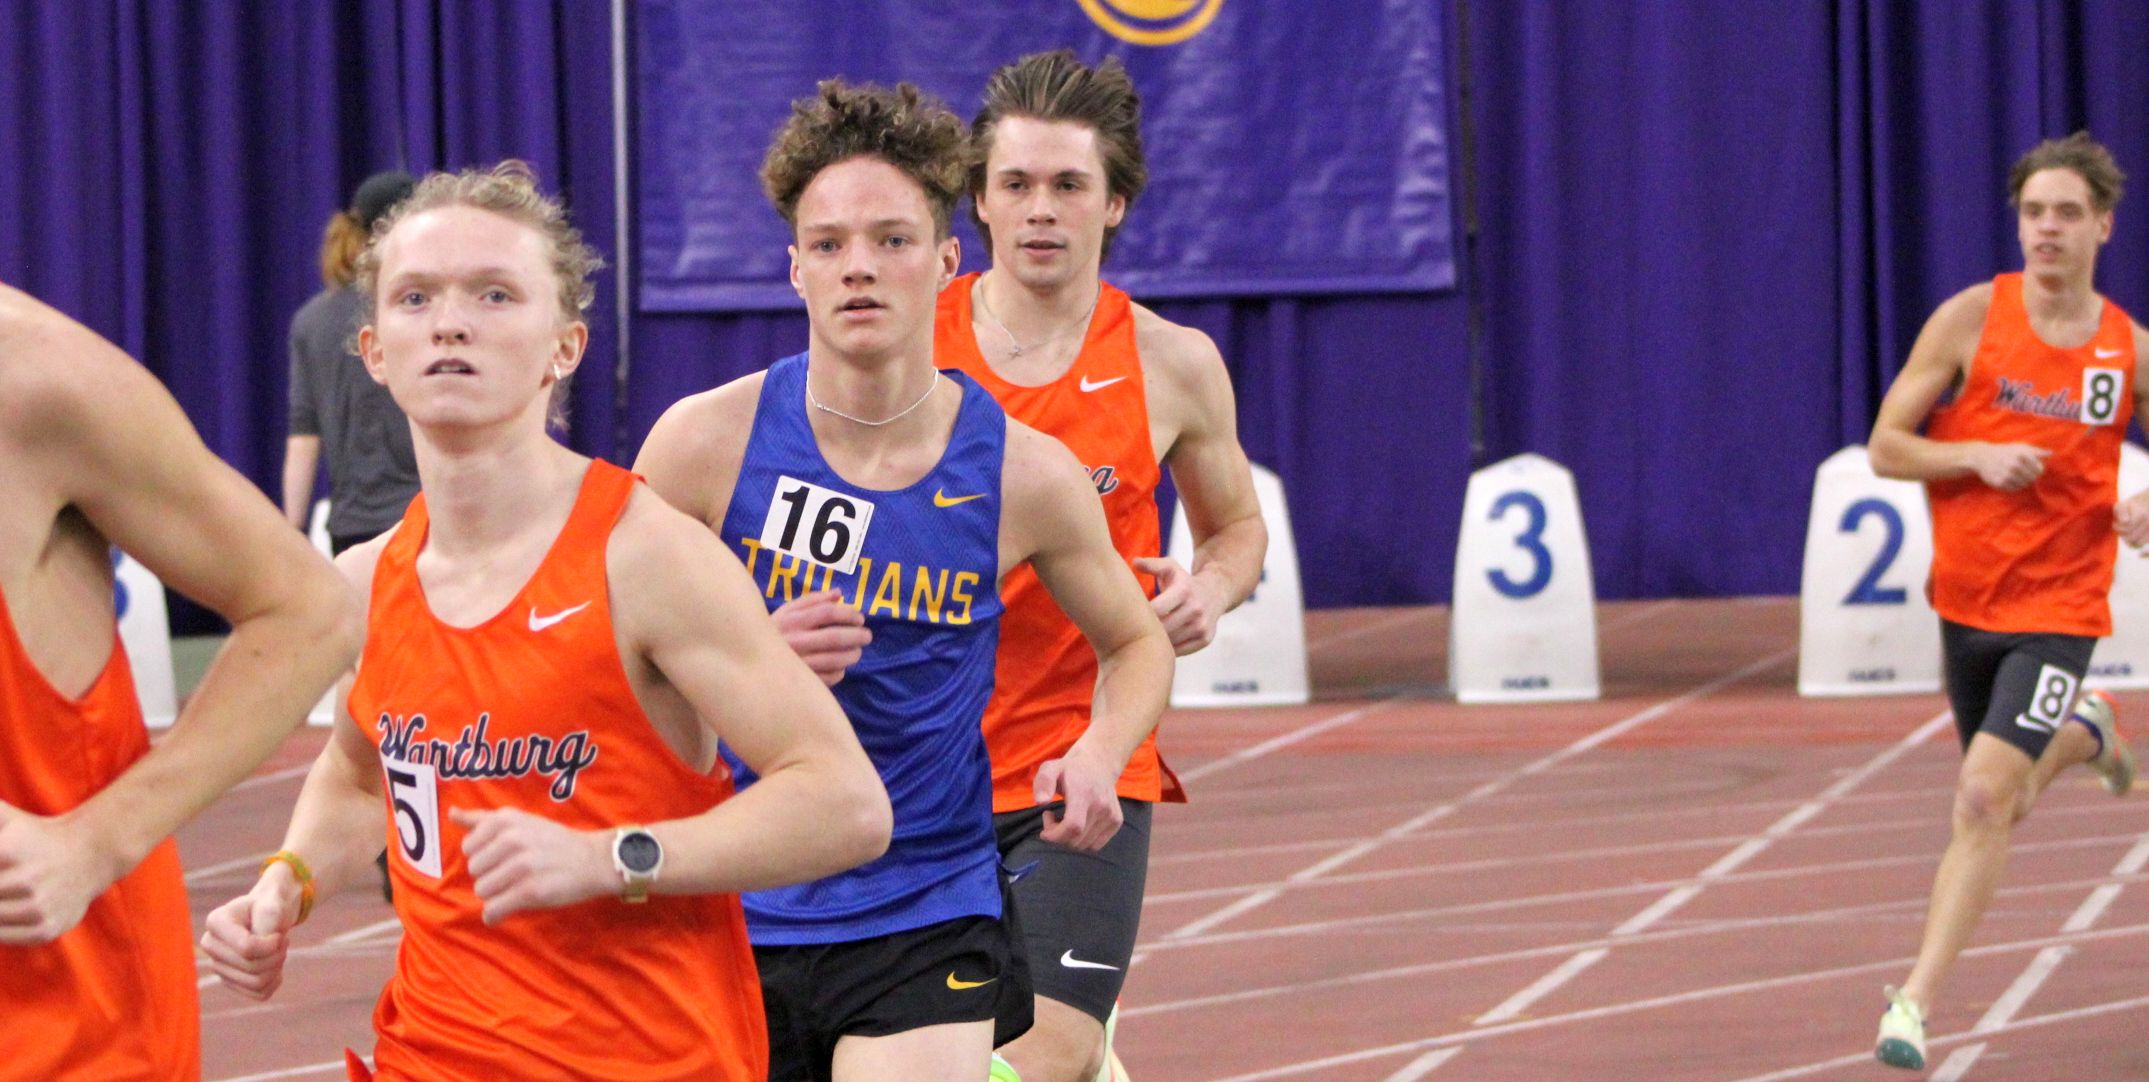 NIACC's Bryson Canton will compete in two events at the NJCAA Indoor Track and Field Championships this weekend.